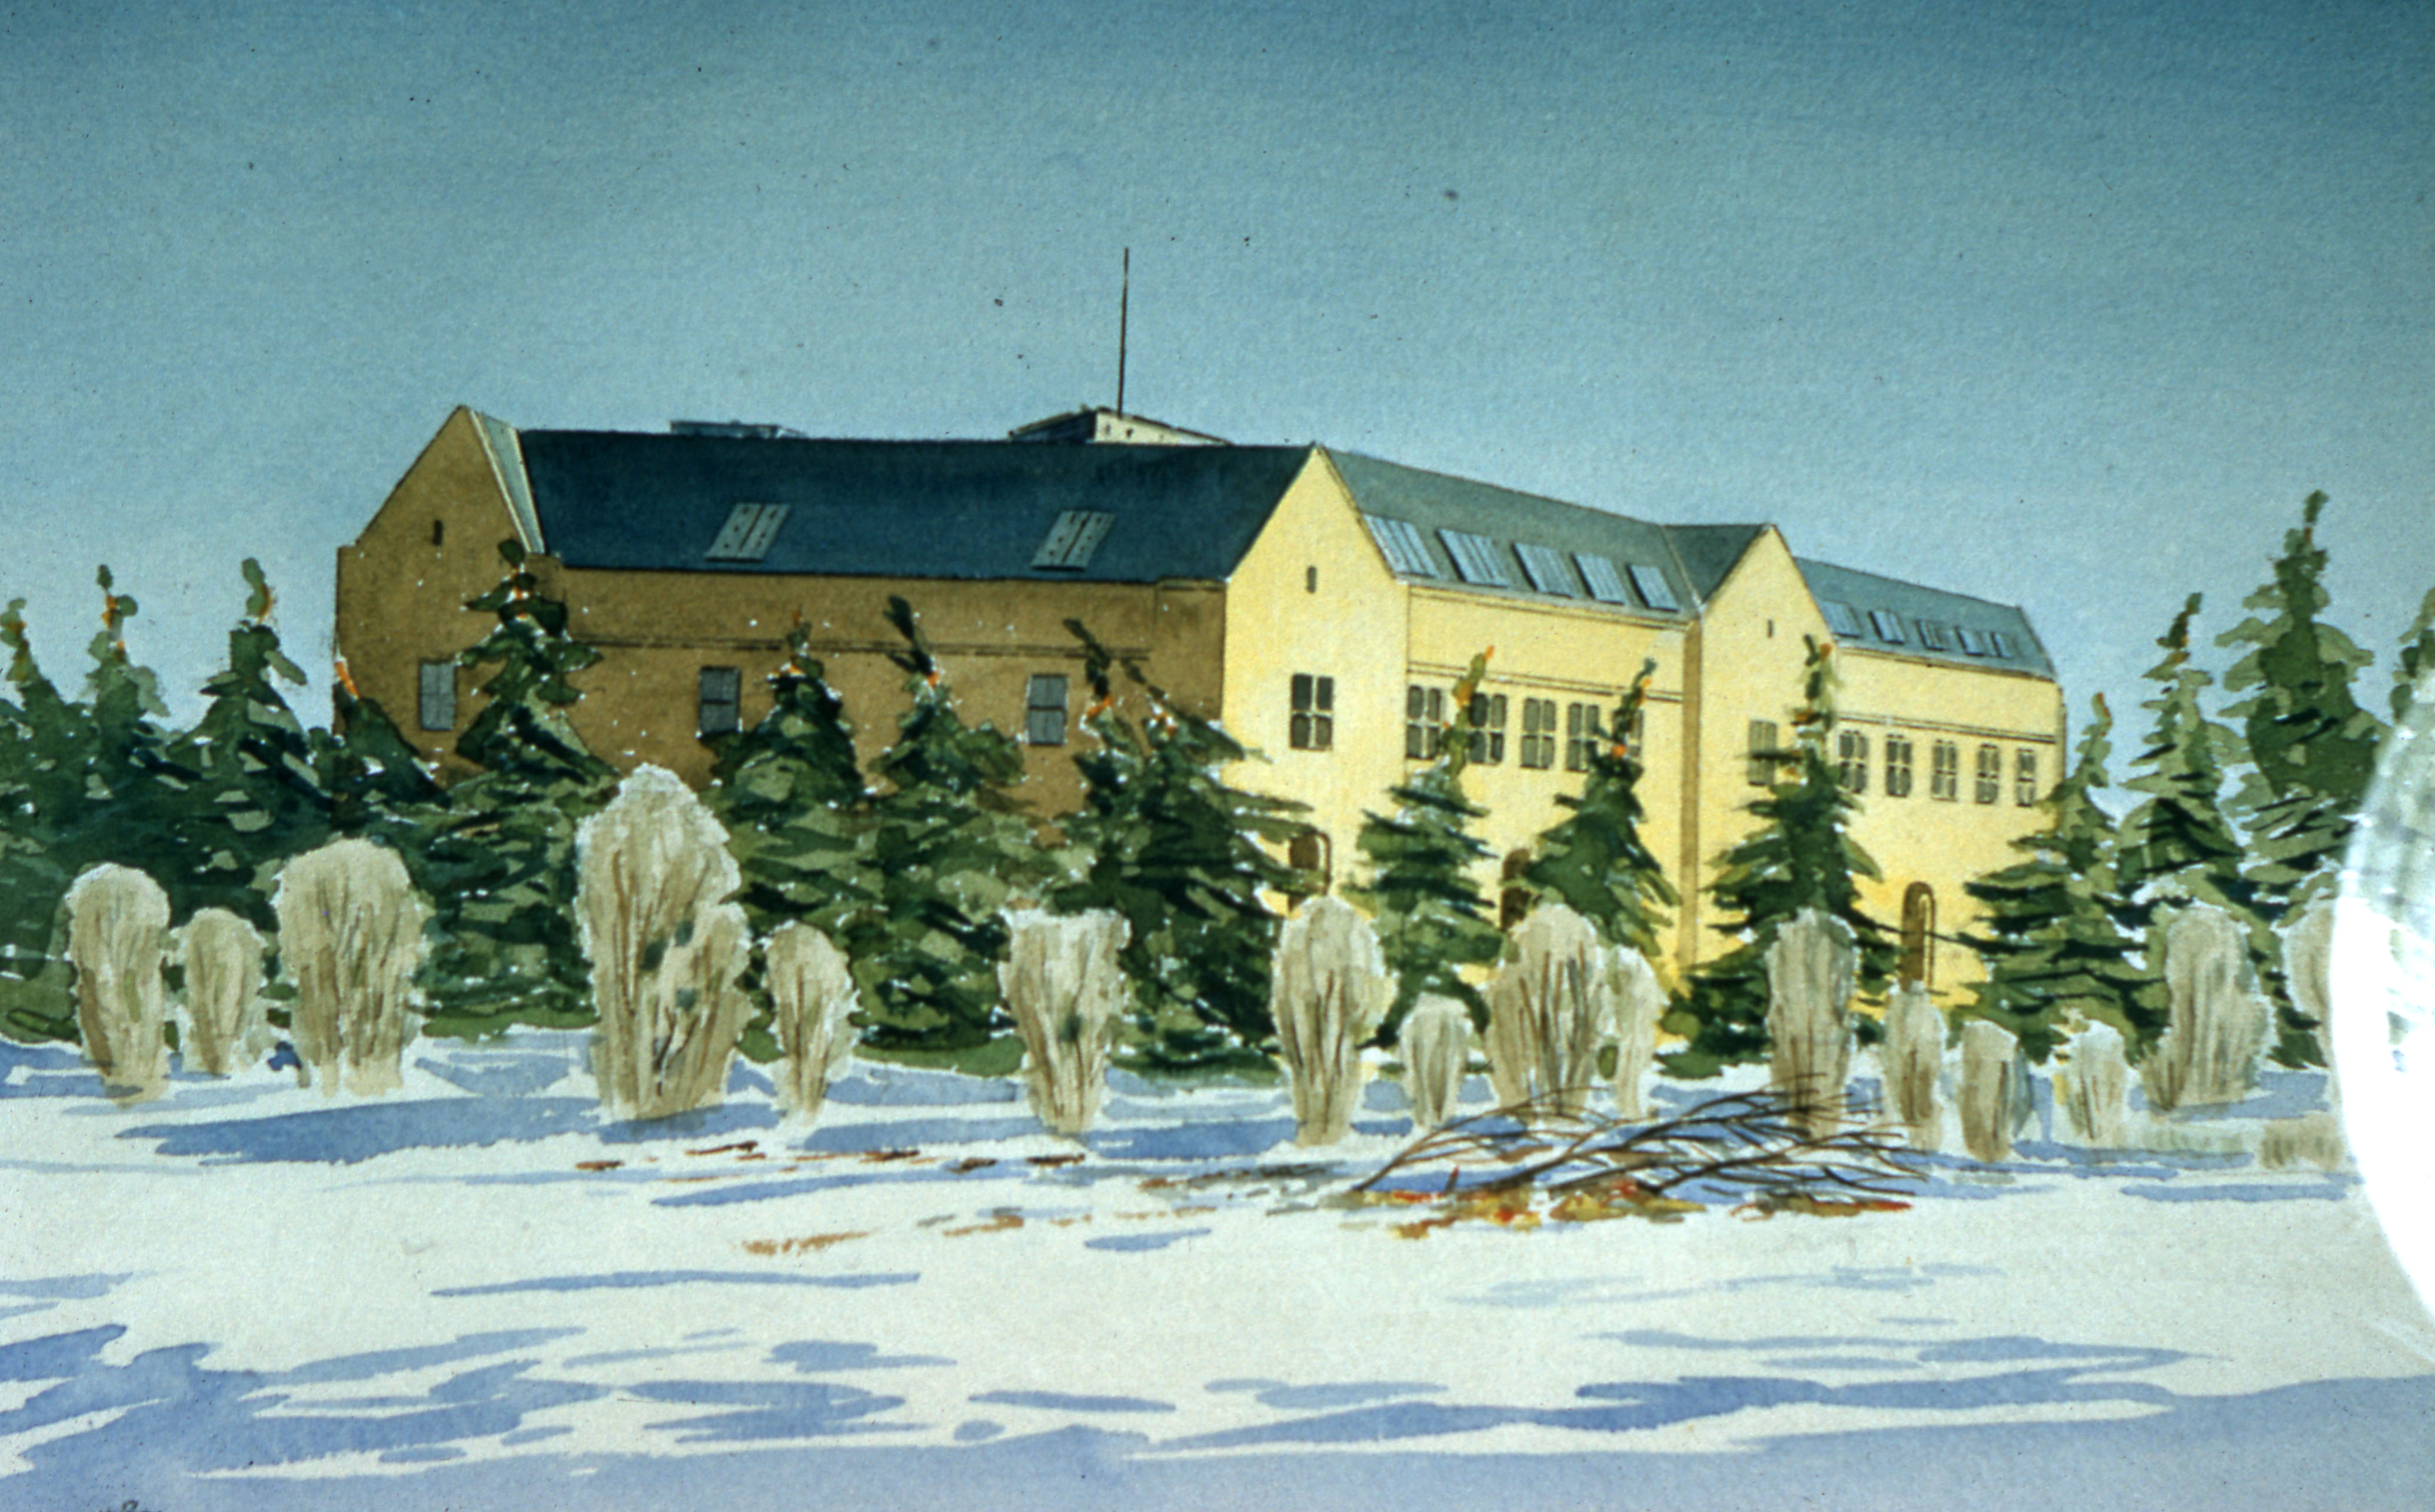 Watercolour painting of the College Building, University of Saskatchewan Campus